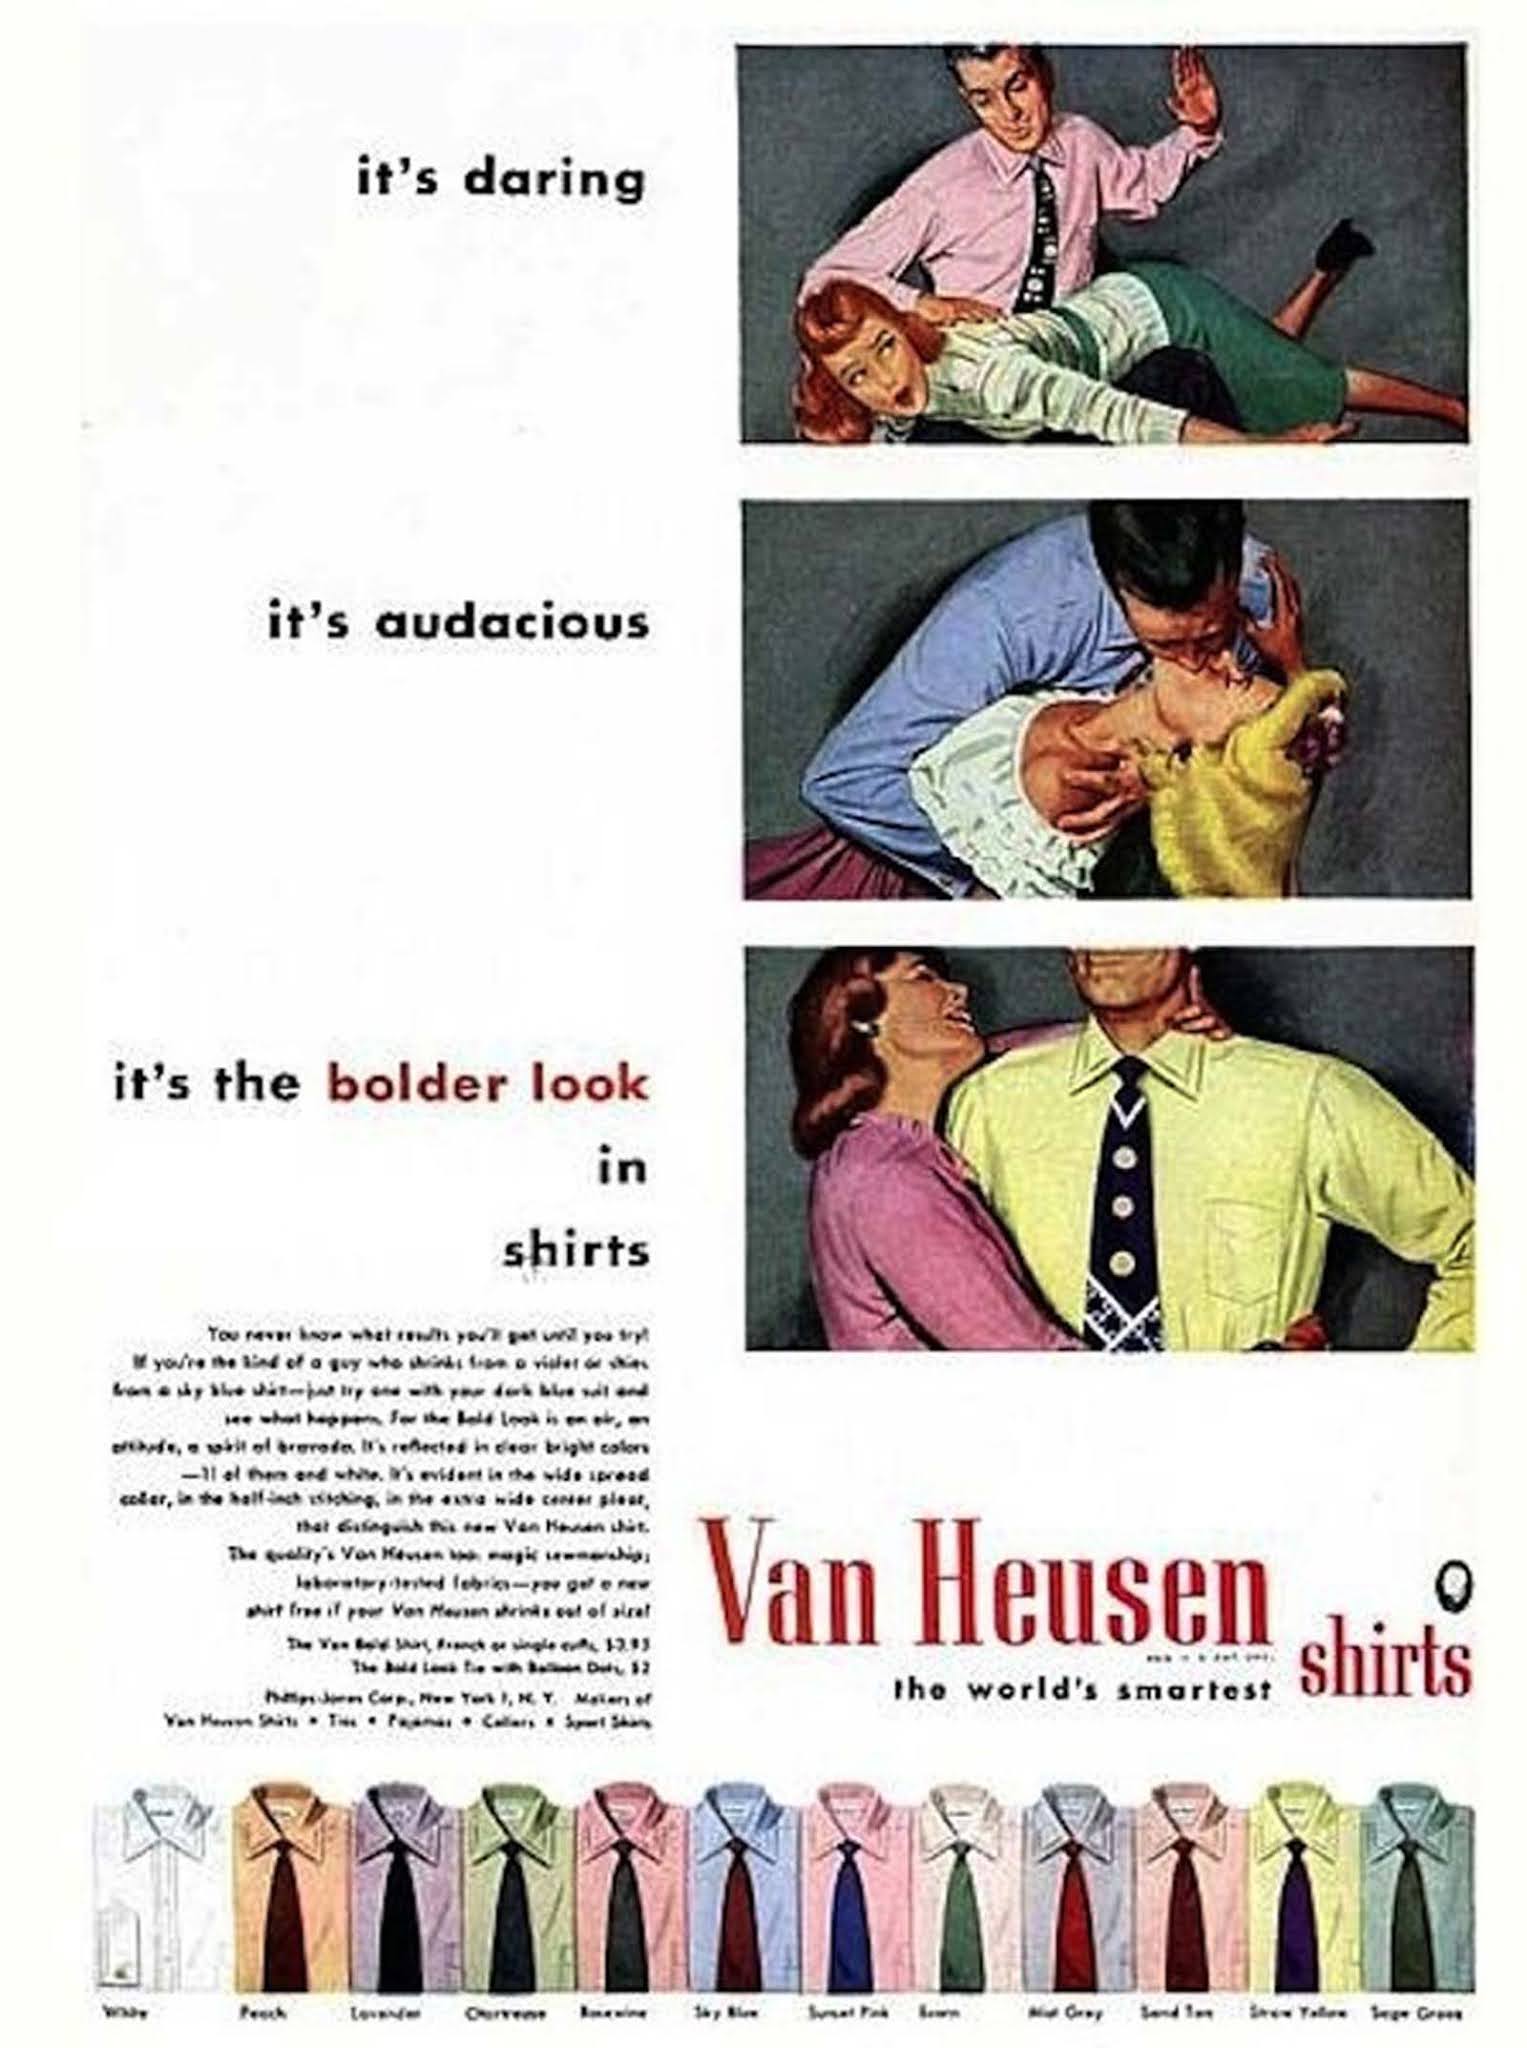 vintage sexist offensive ads